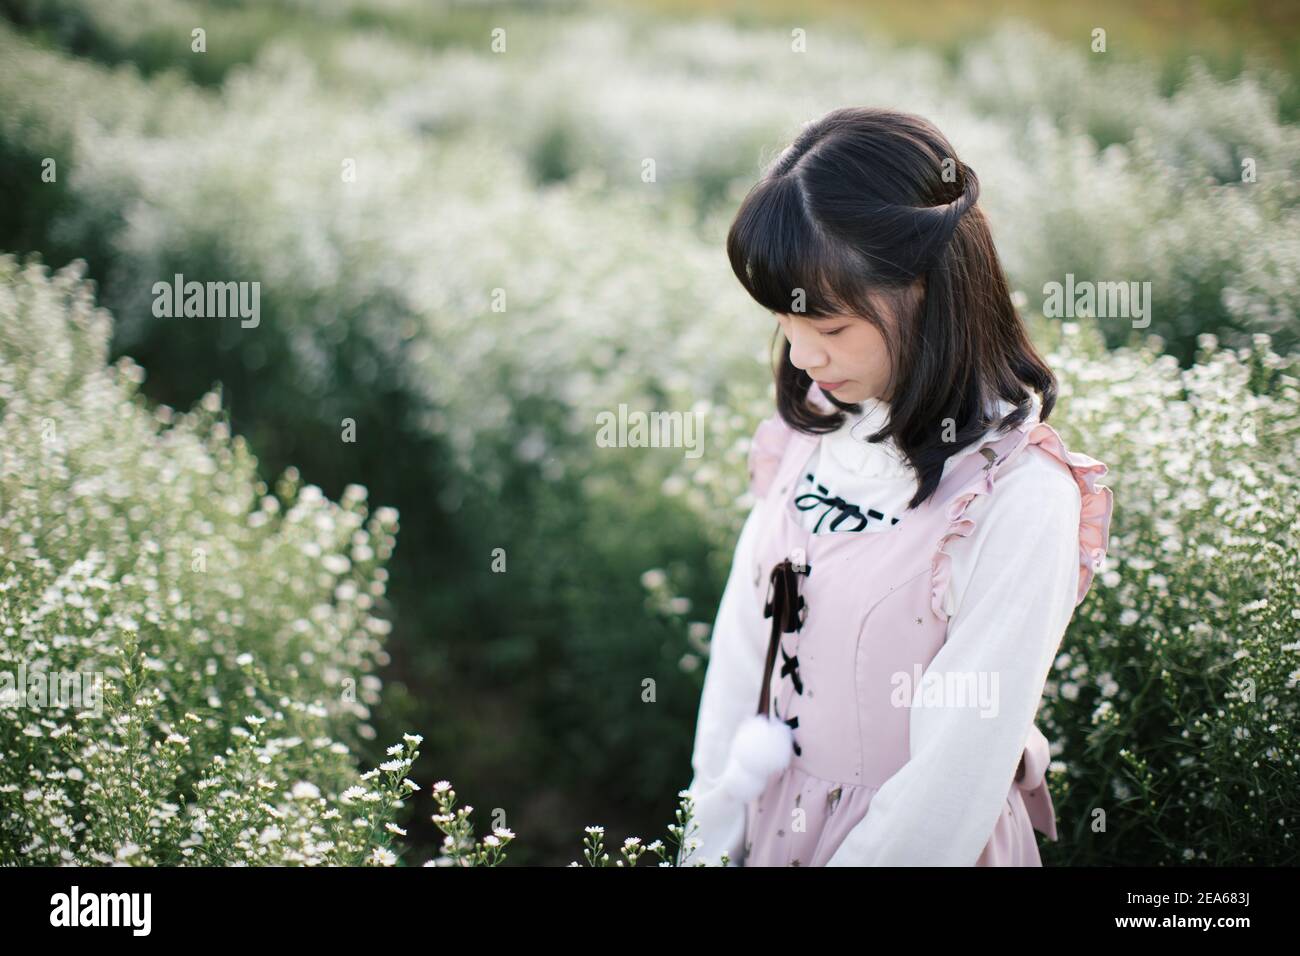 Portrait asian girl with little white flowers background Stock Photo